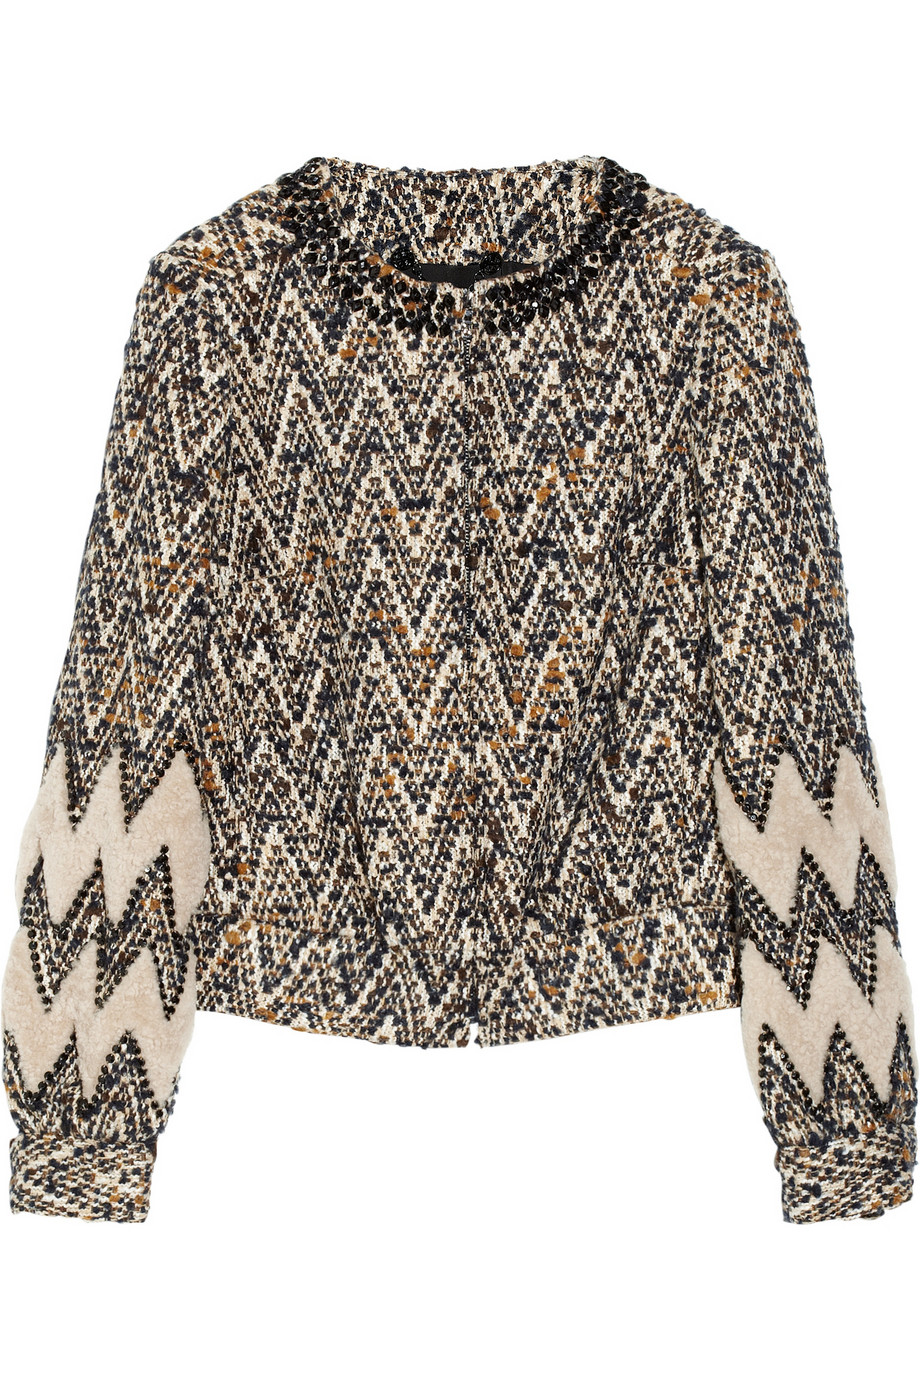 Lyst - Tory Burch Cory Embellished Bouclé Jacket in Natural